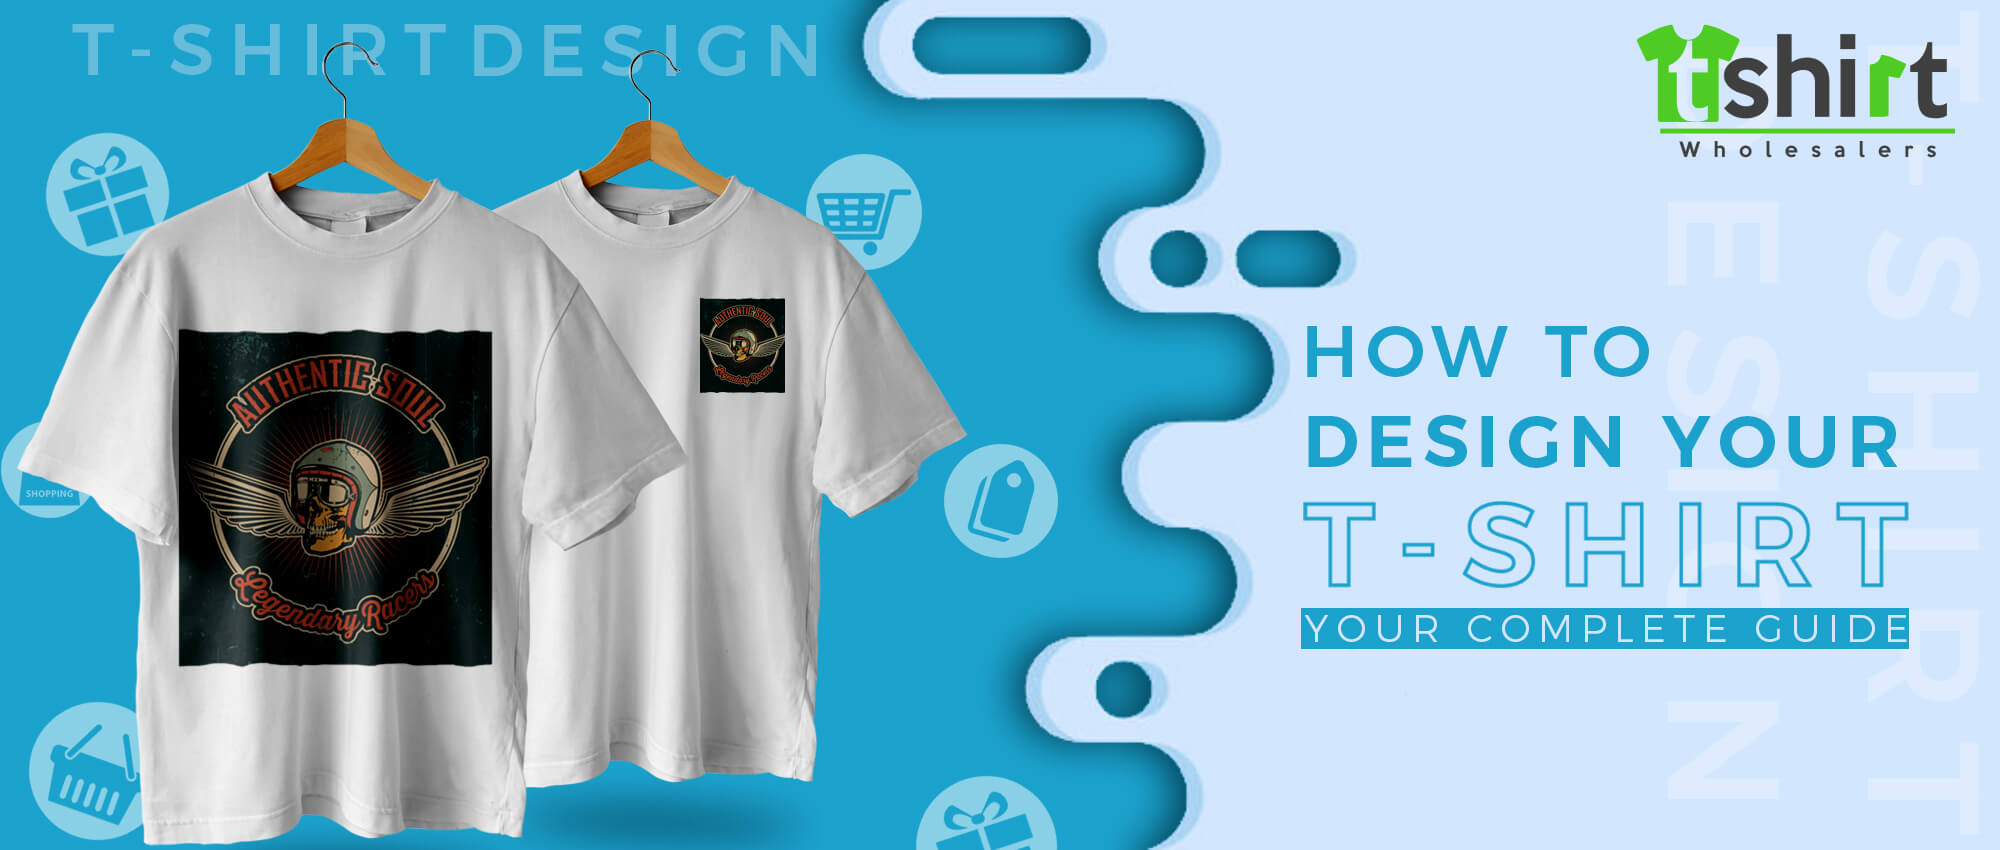 HOW TO DESIGN YOUR T-SHIRT – YOUR COMPLETE GUIDE